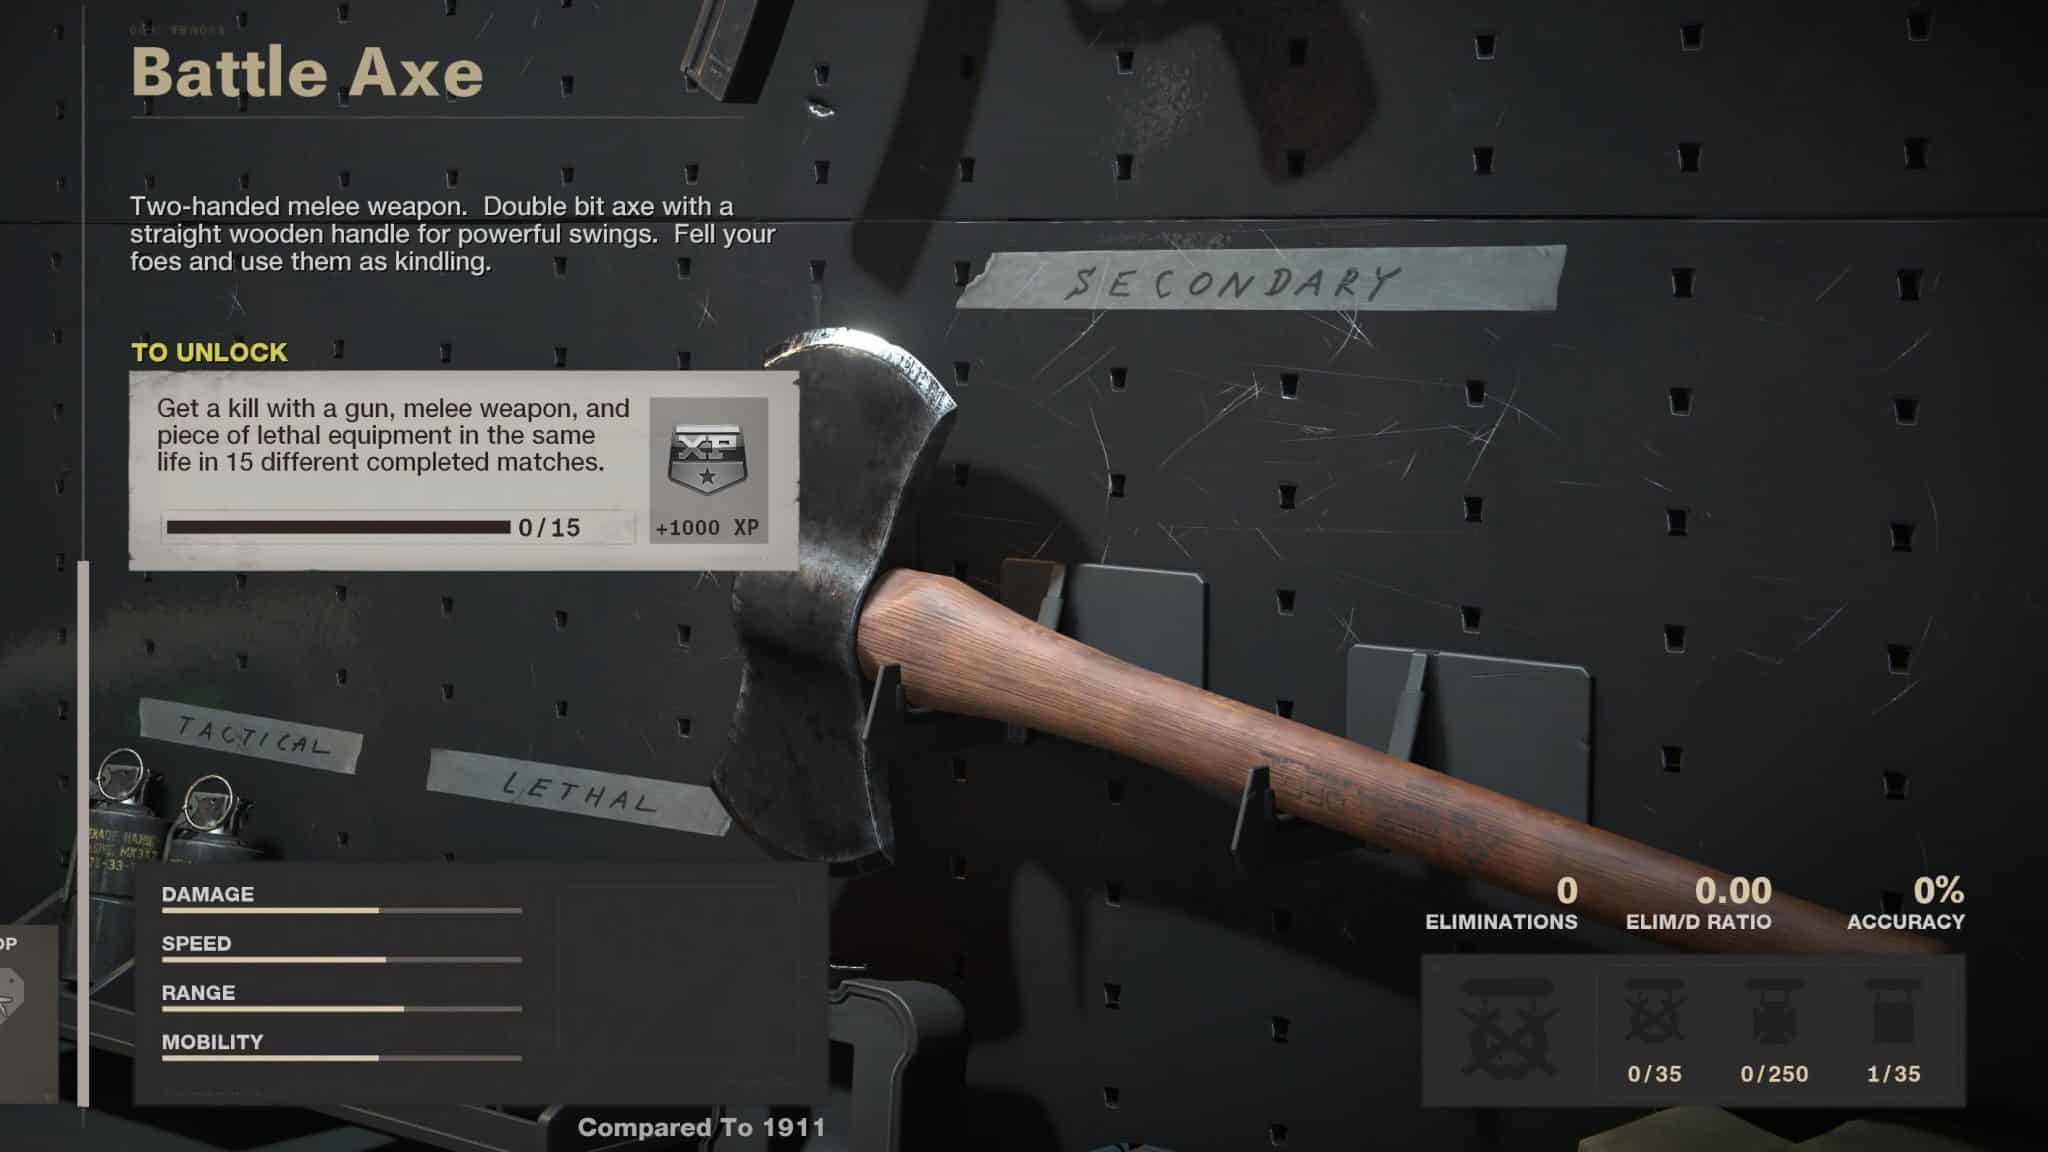 Battle Axe in the Black Ops Cold War menus.